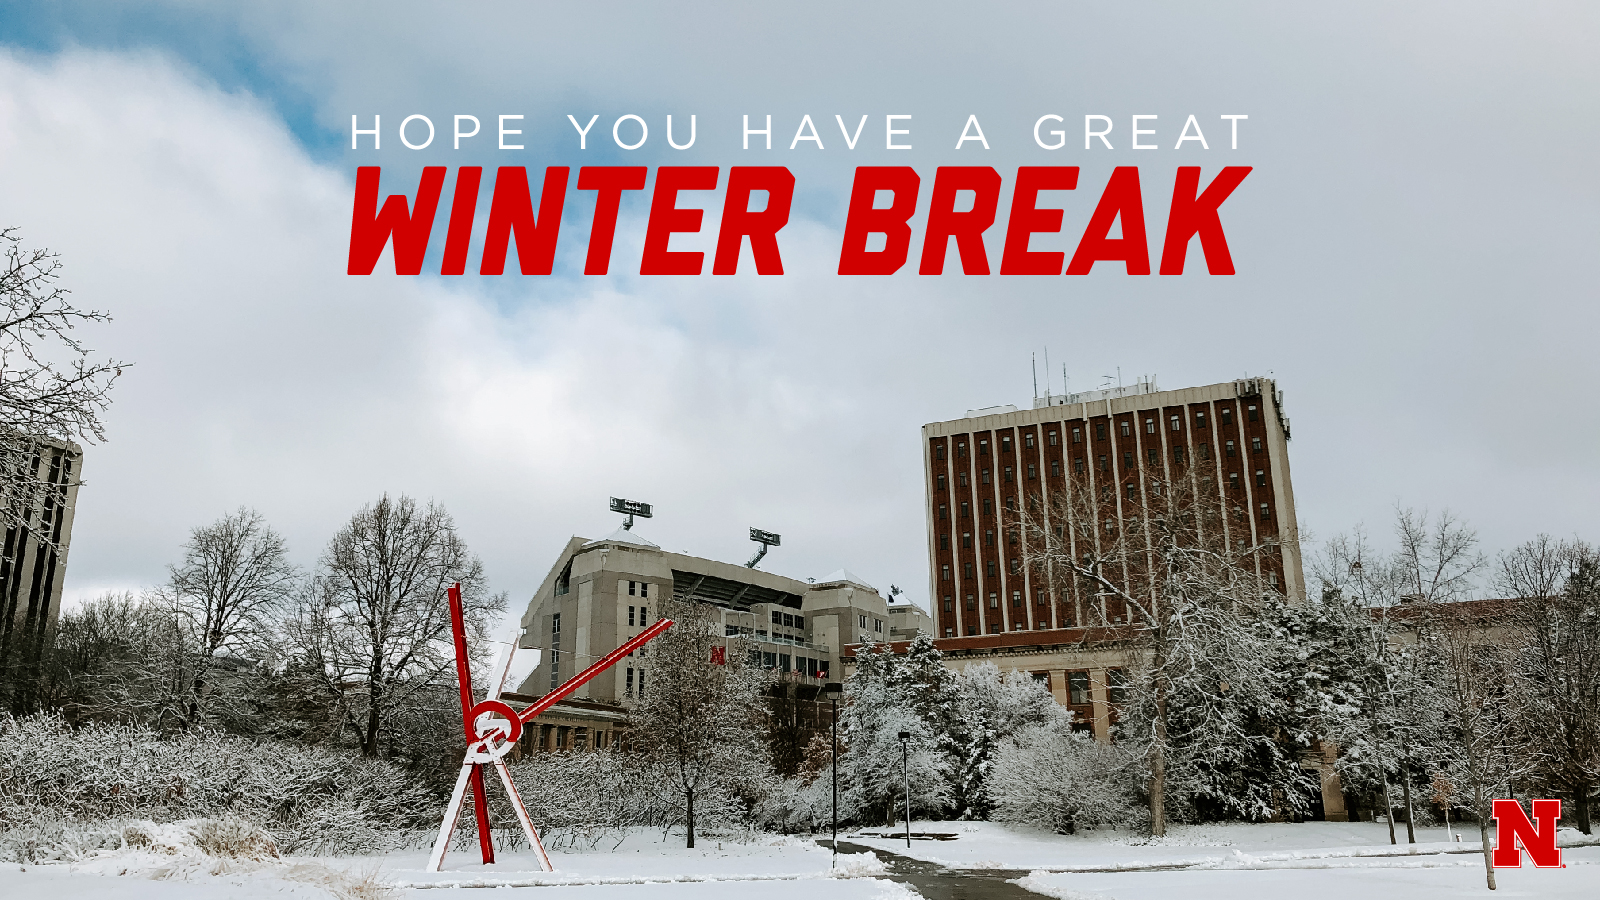 Hope you have a great winter break.